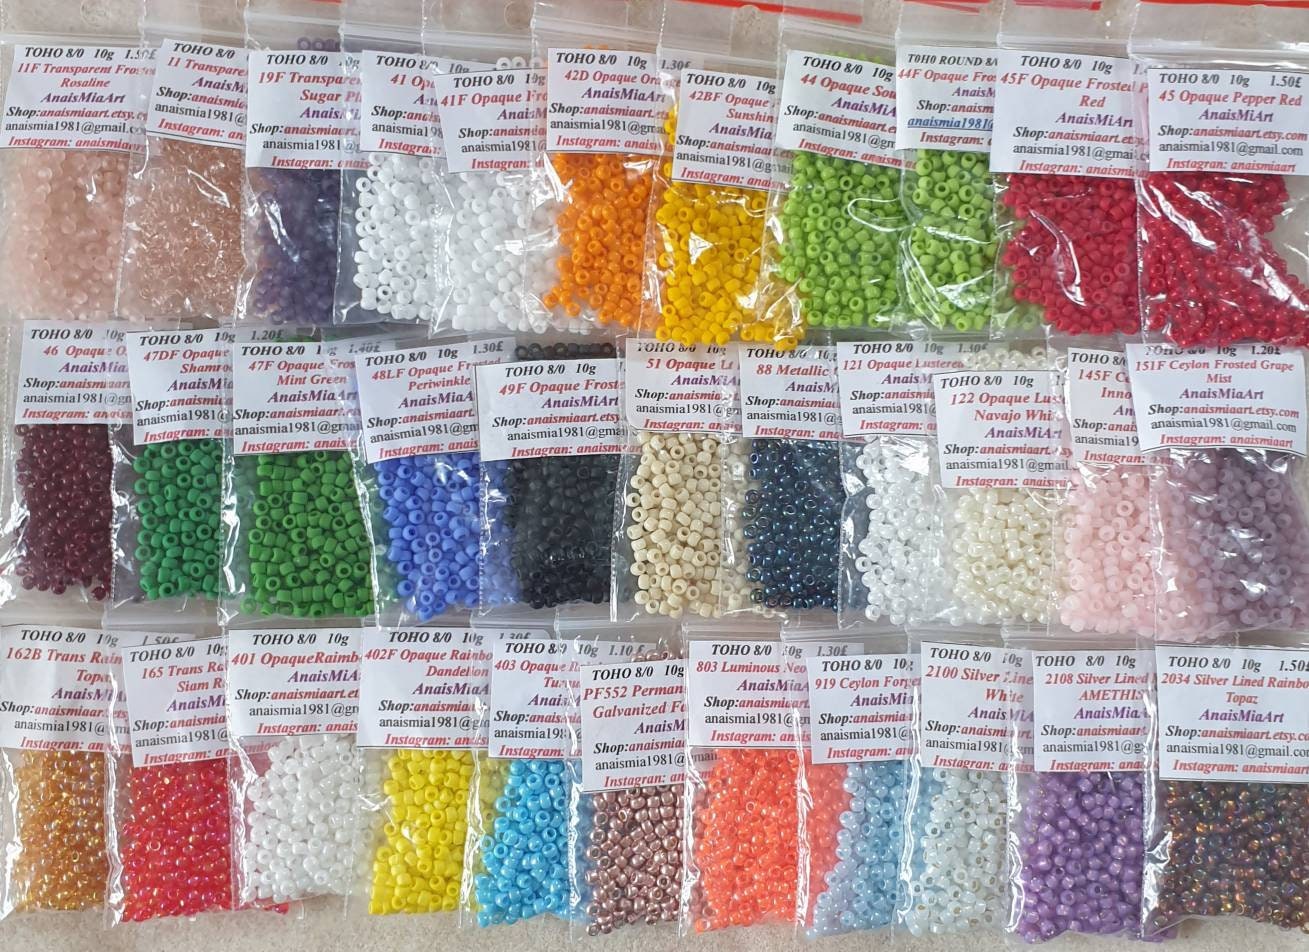 Glass Seed Bead Jewelry Making Kit, Multicolor Miyuki Glass Bead Kit,  Jewelry Making Kit, Craft Kit Jewelry Making Kit, Bead Kit Set, 